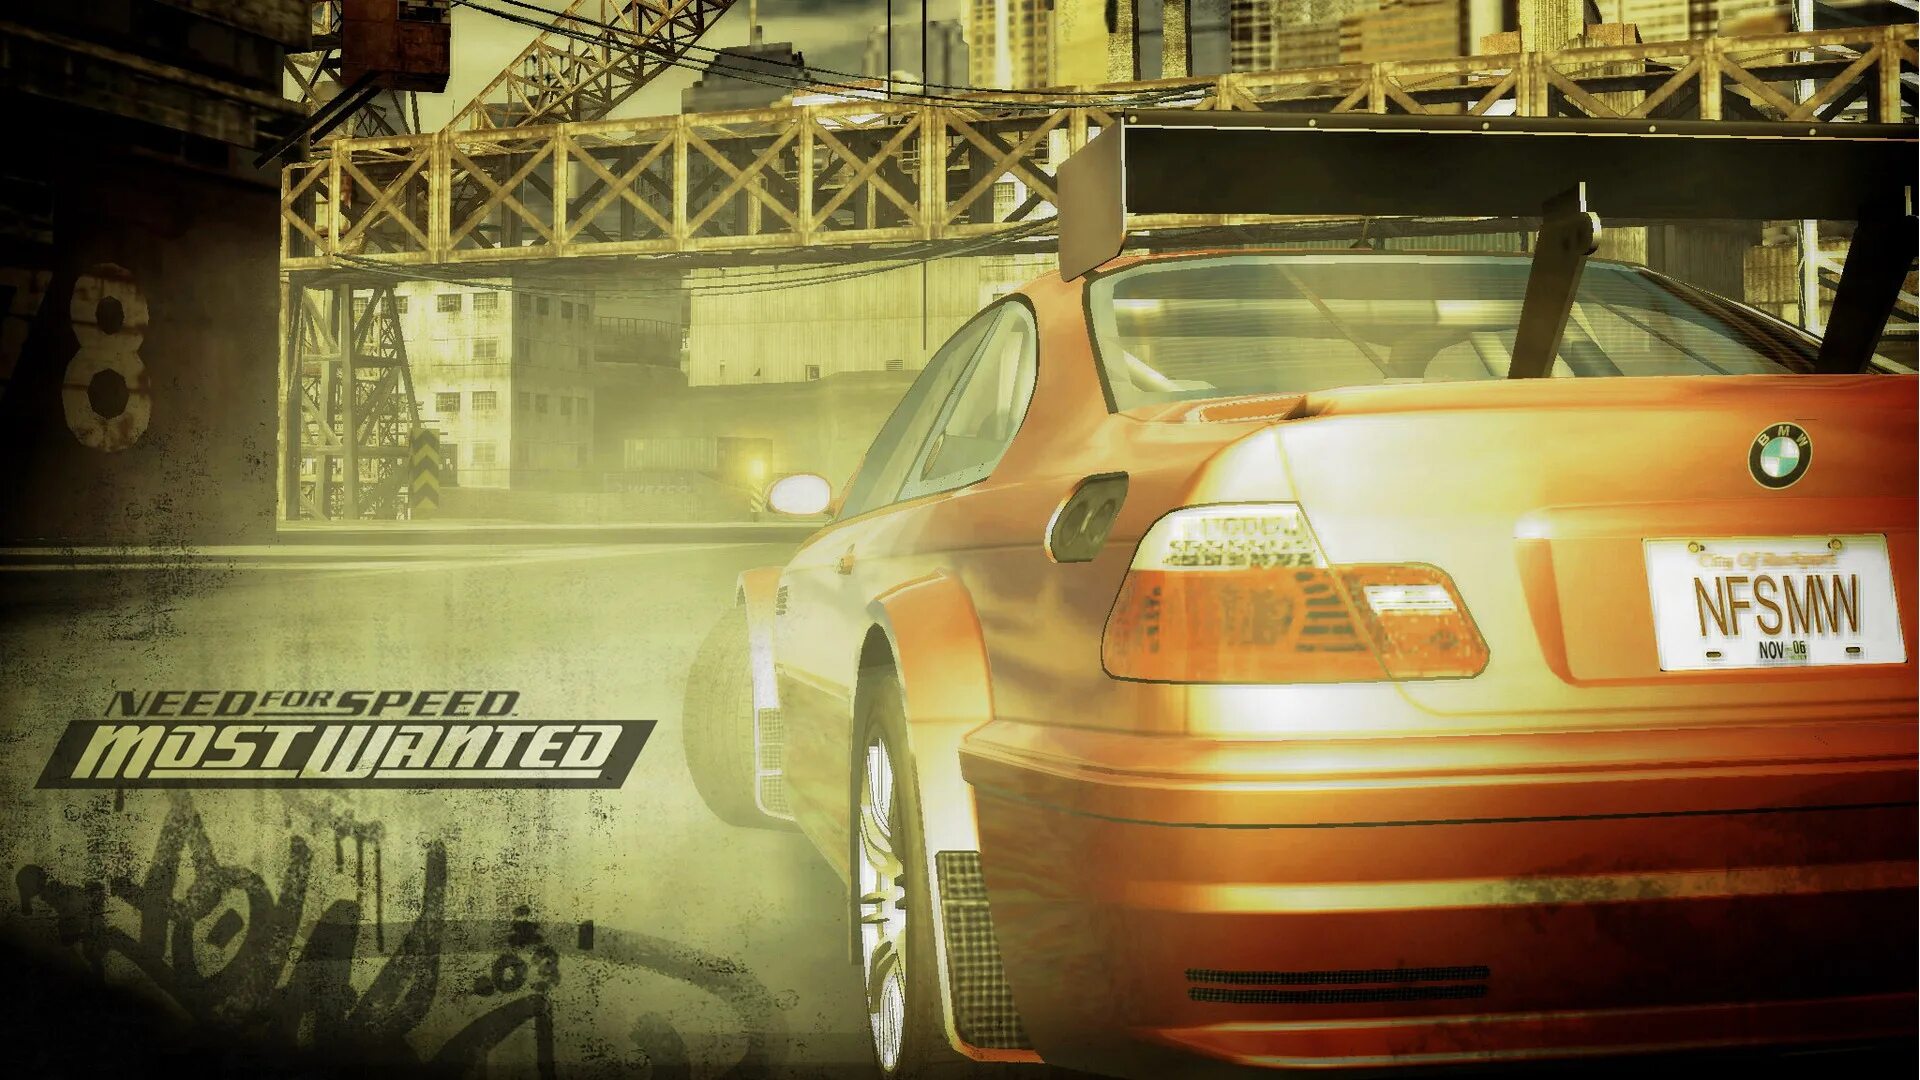 Games need speed most wanted. Most wanted 2005. NFS most wanted. Нфс most wanted. Нид фор СПИД мост вантед 4.